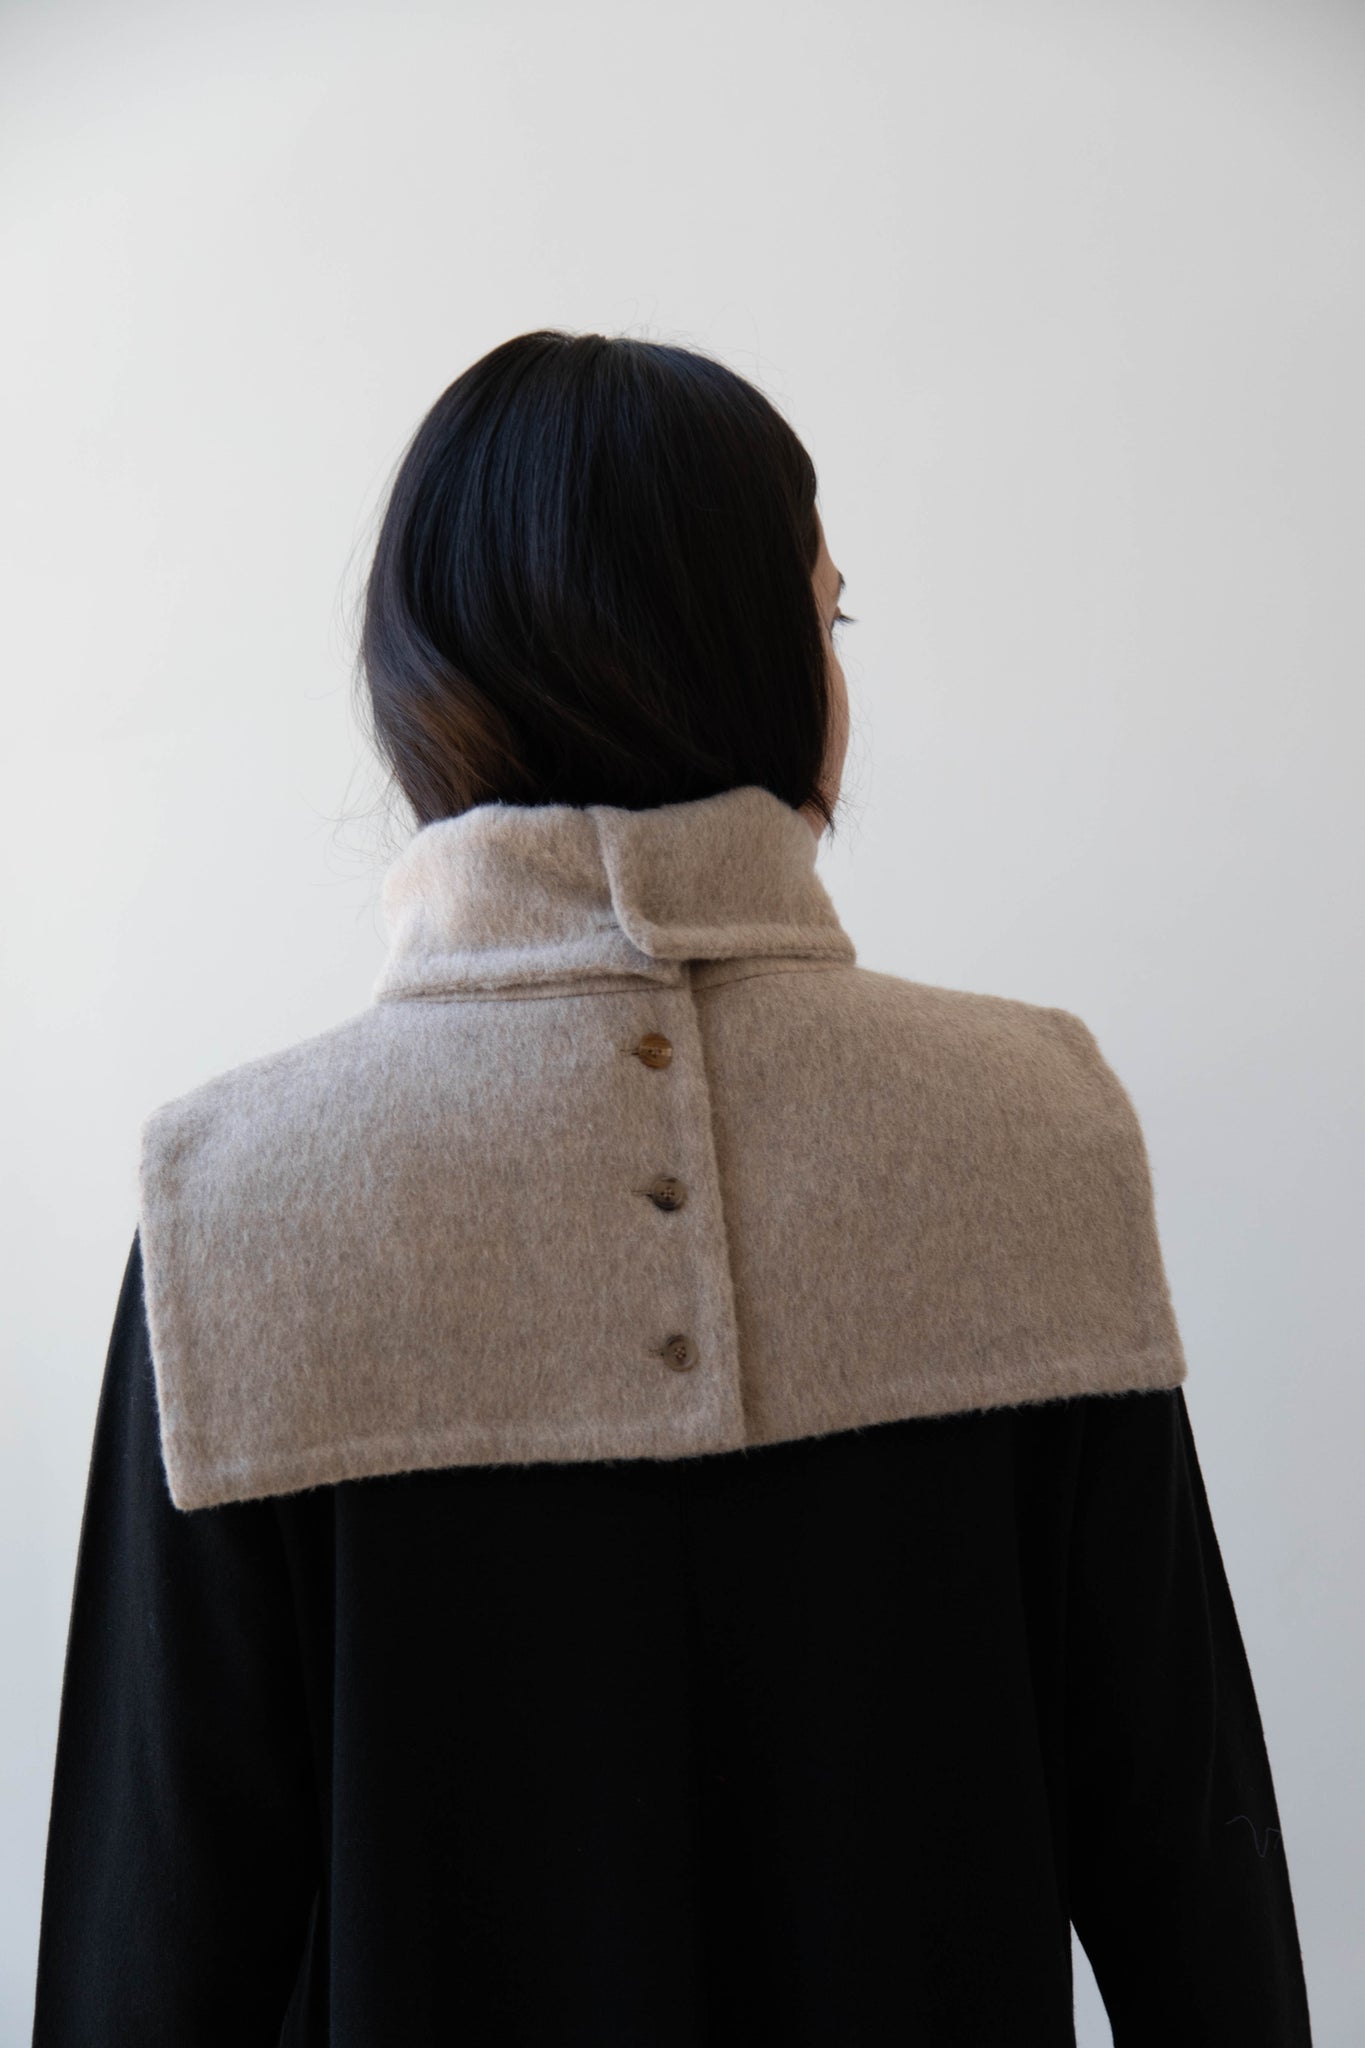 EASTBYEASTWEST Hearn Cape in Oyster